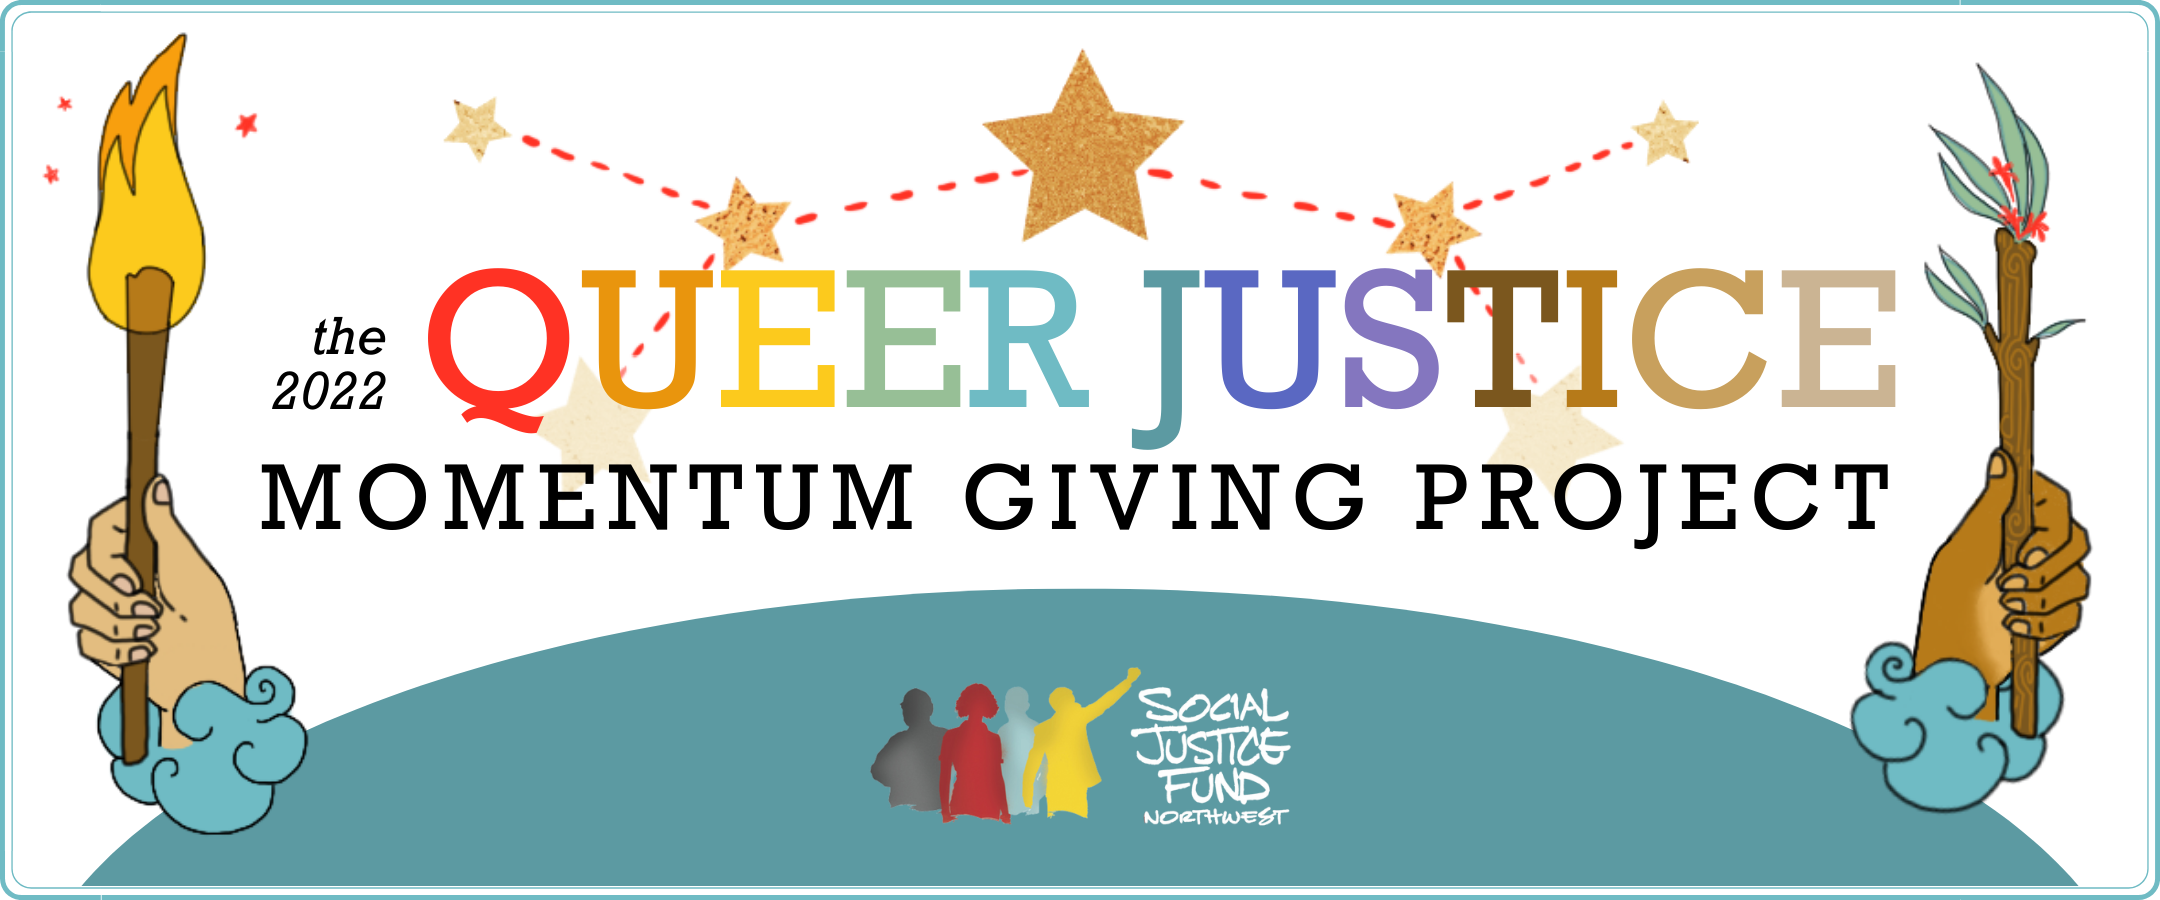 Rectangular banner with teal half oval at bottom and teal lines around the edges. Text reads the 2022 Queer Justice Momentum Giving Project